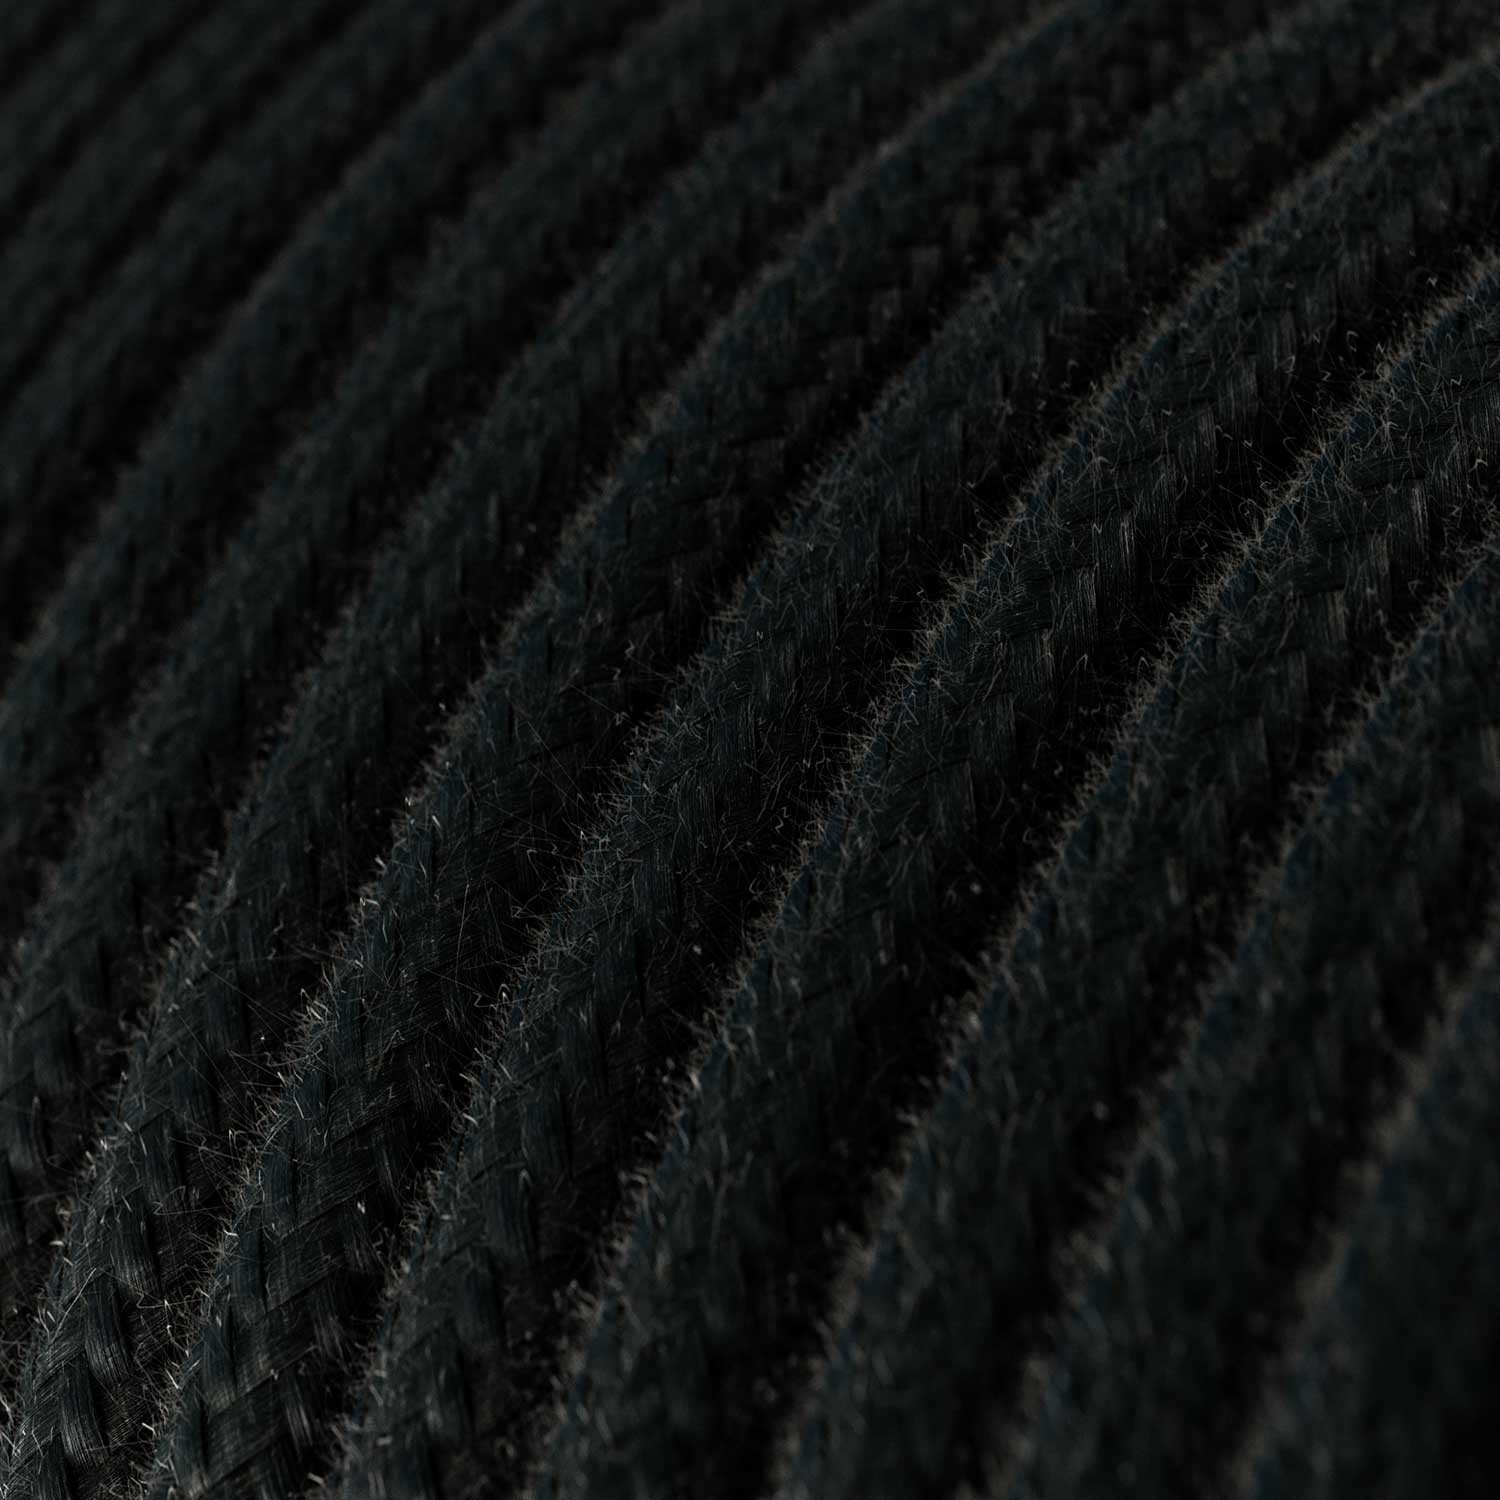 RC04 Black Solid Round Cotton Electrical Fabric Cloth Cord Cable